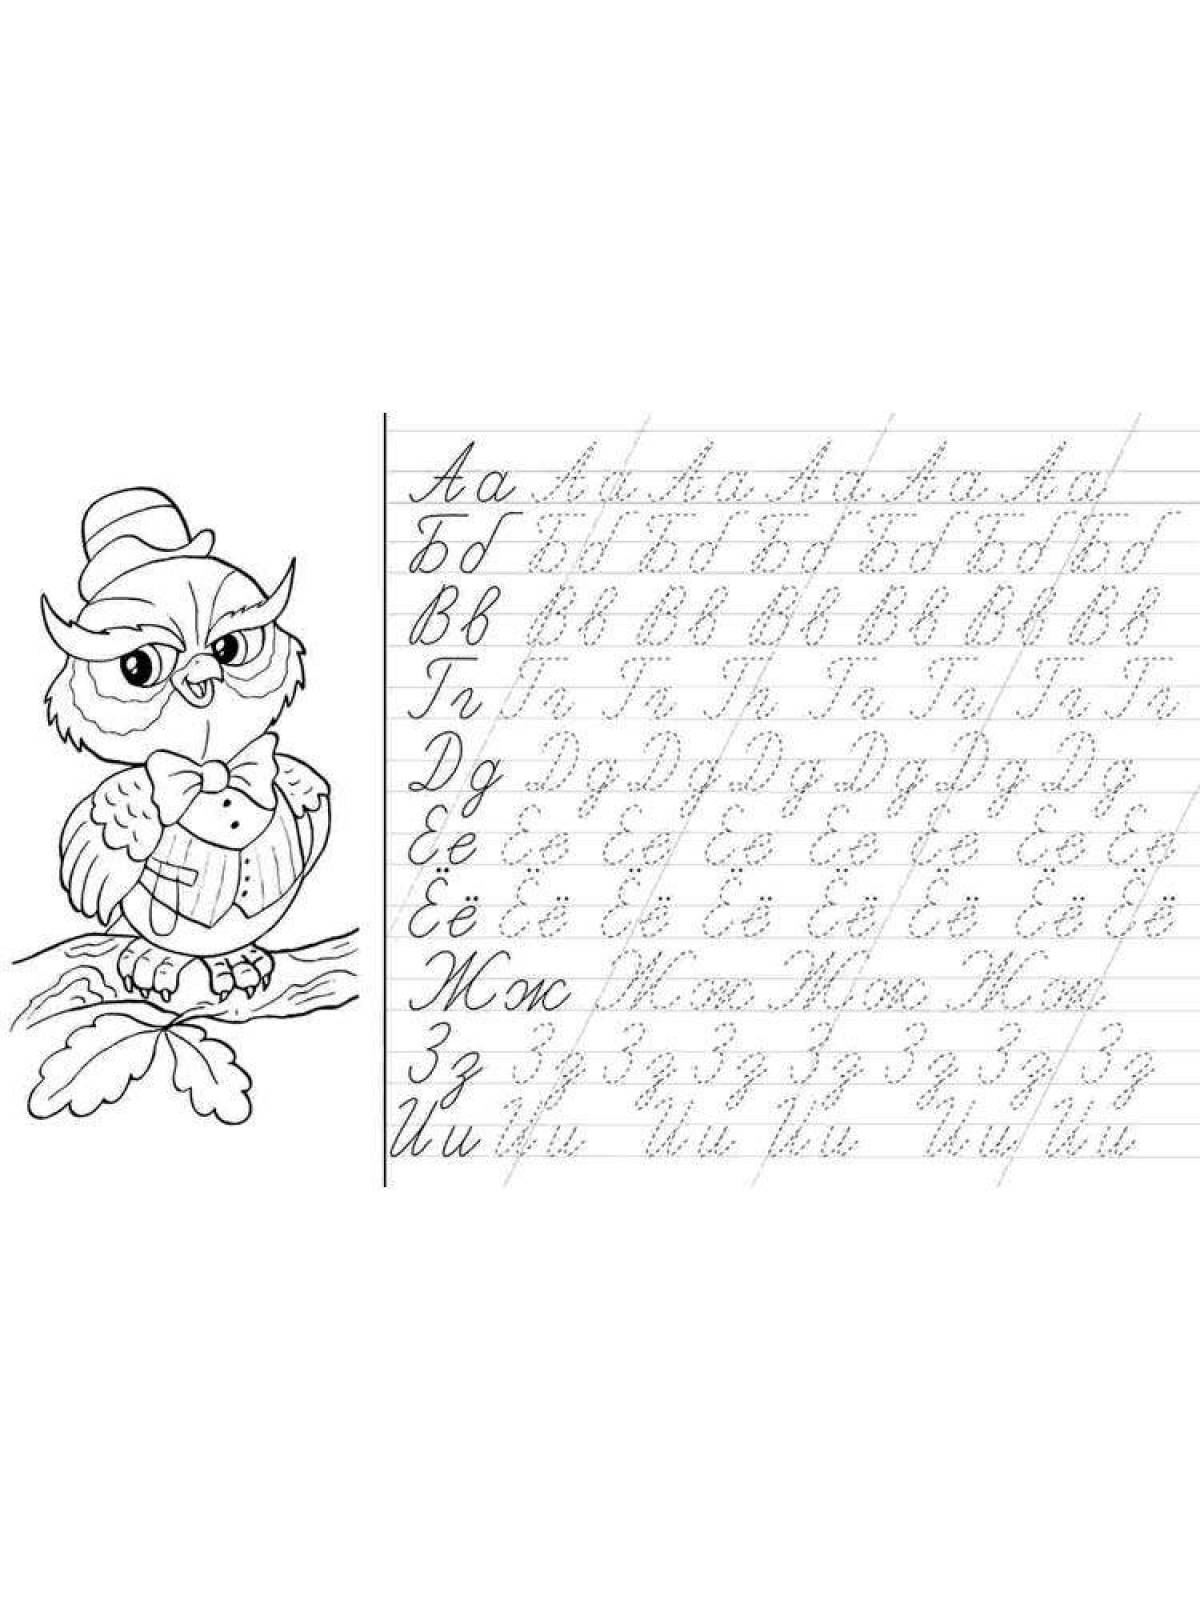 Color-frenzy coloring page how to write a word